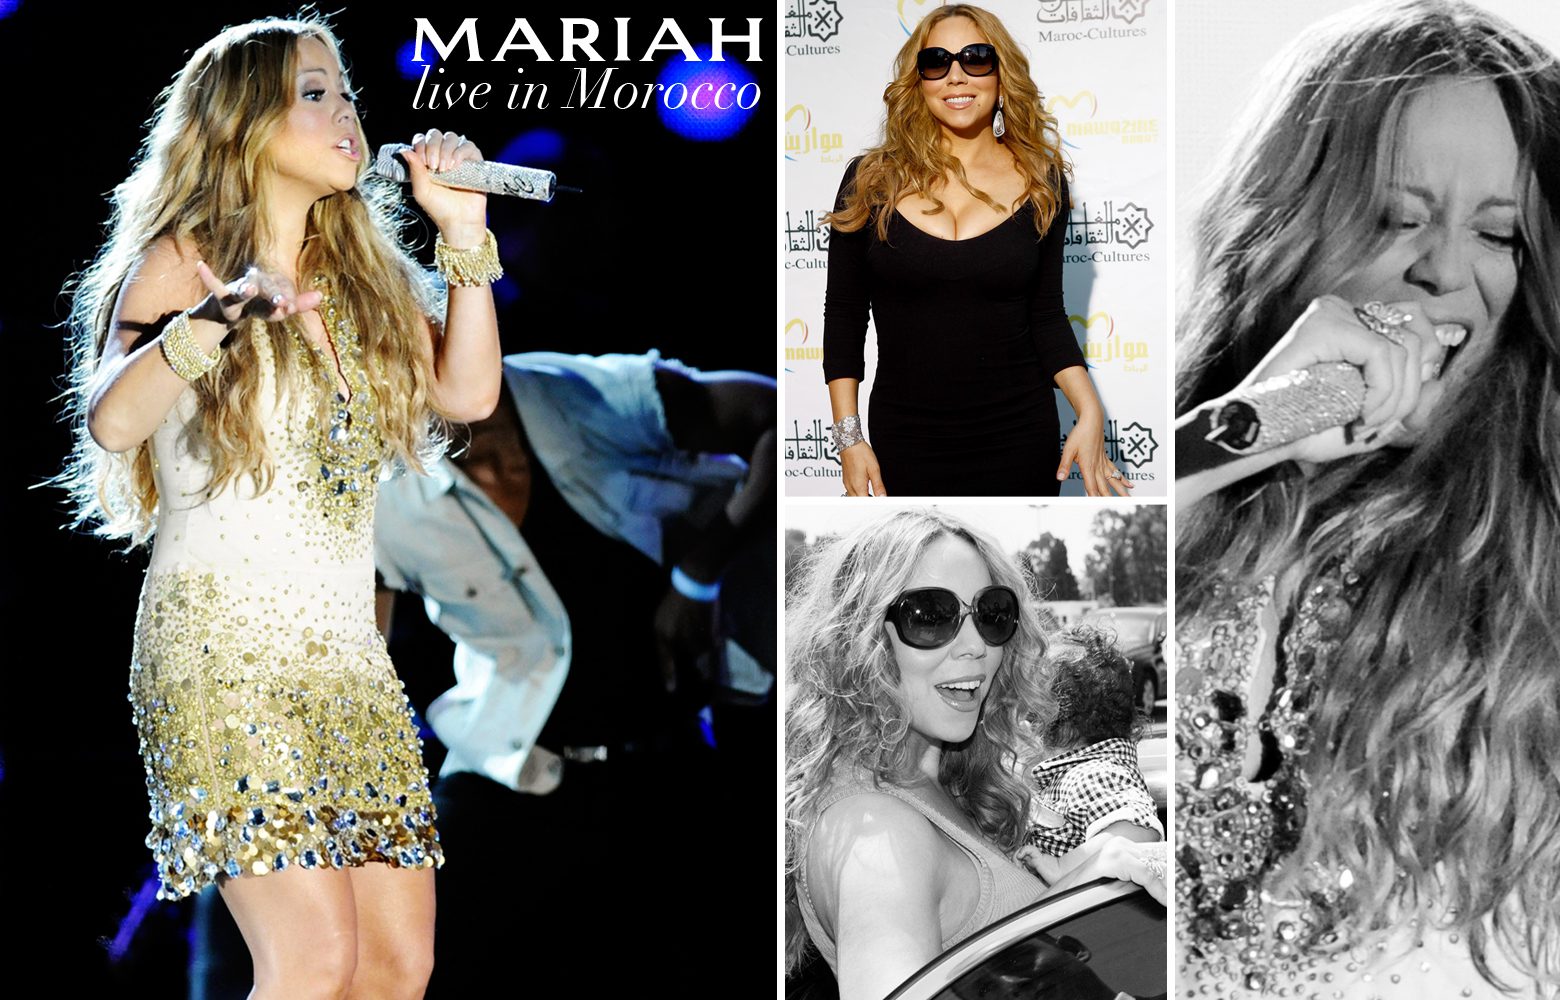 Mariah Carey Live in Concert in Morocco